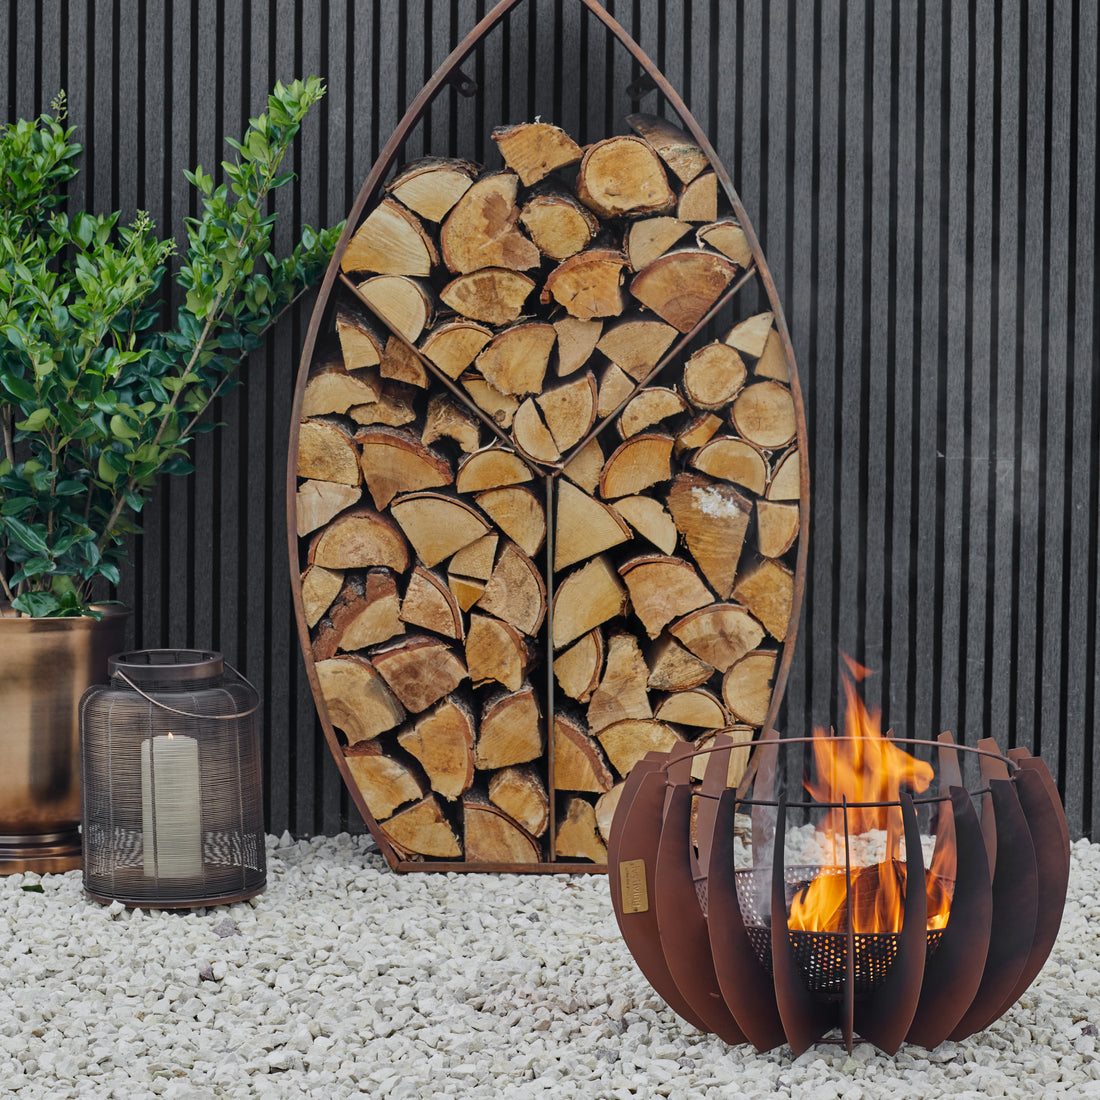 Outdoor Solis Fire Pit in Rust